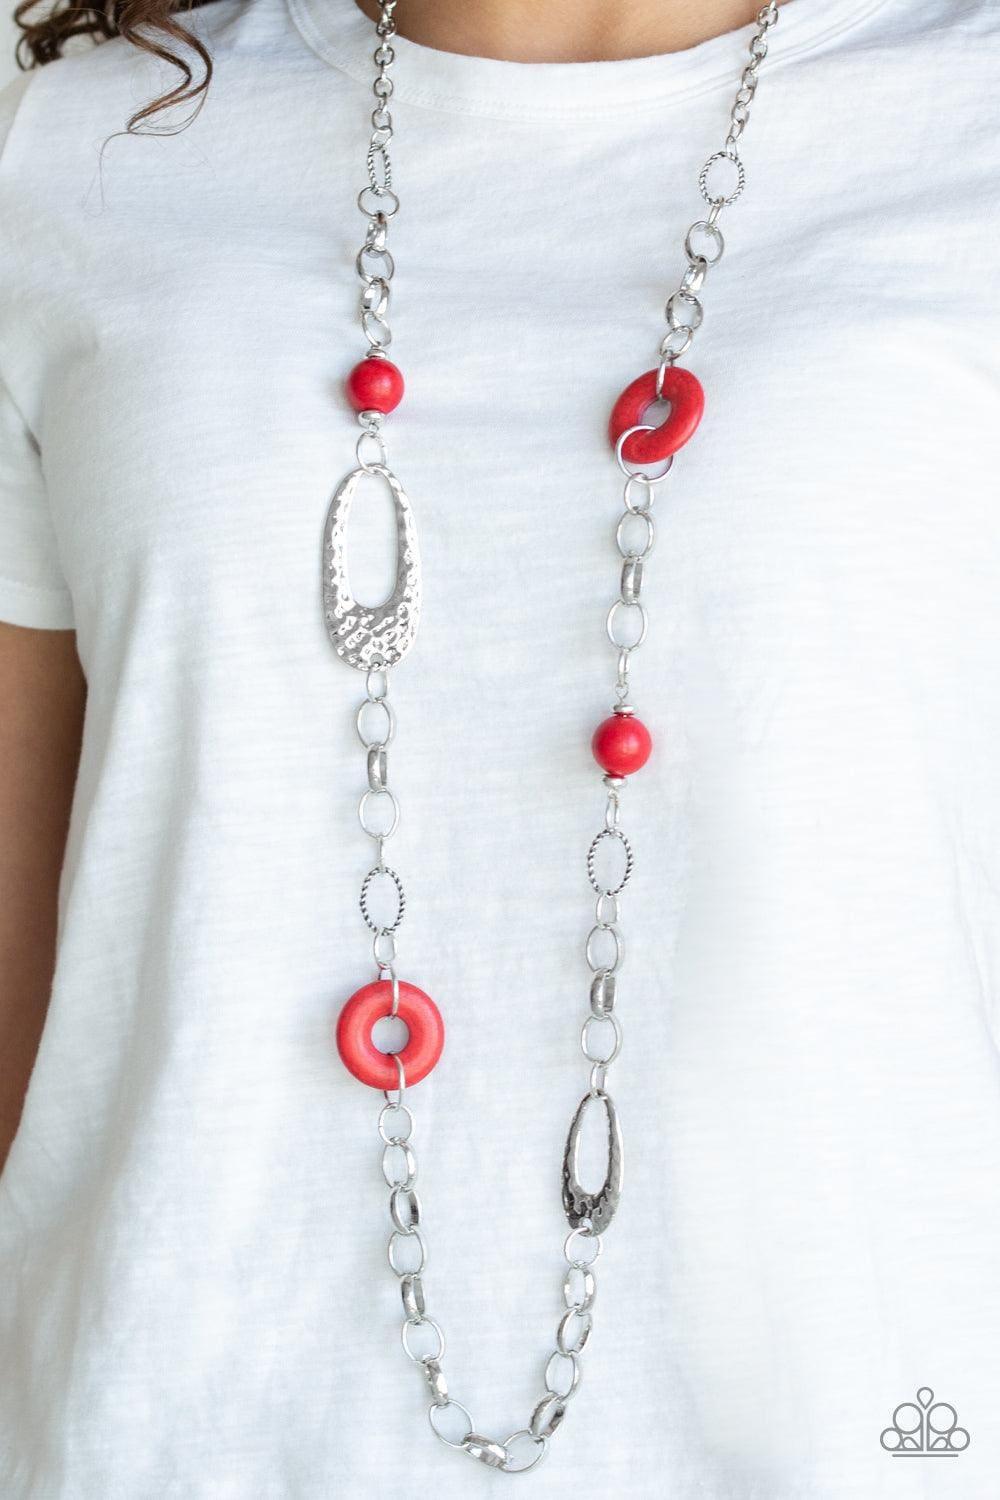 Paparazzi Accessories - Artisan Artifact - Red Necklace - Bling by JessieK